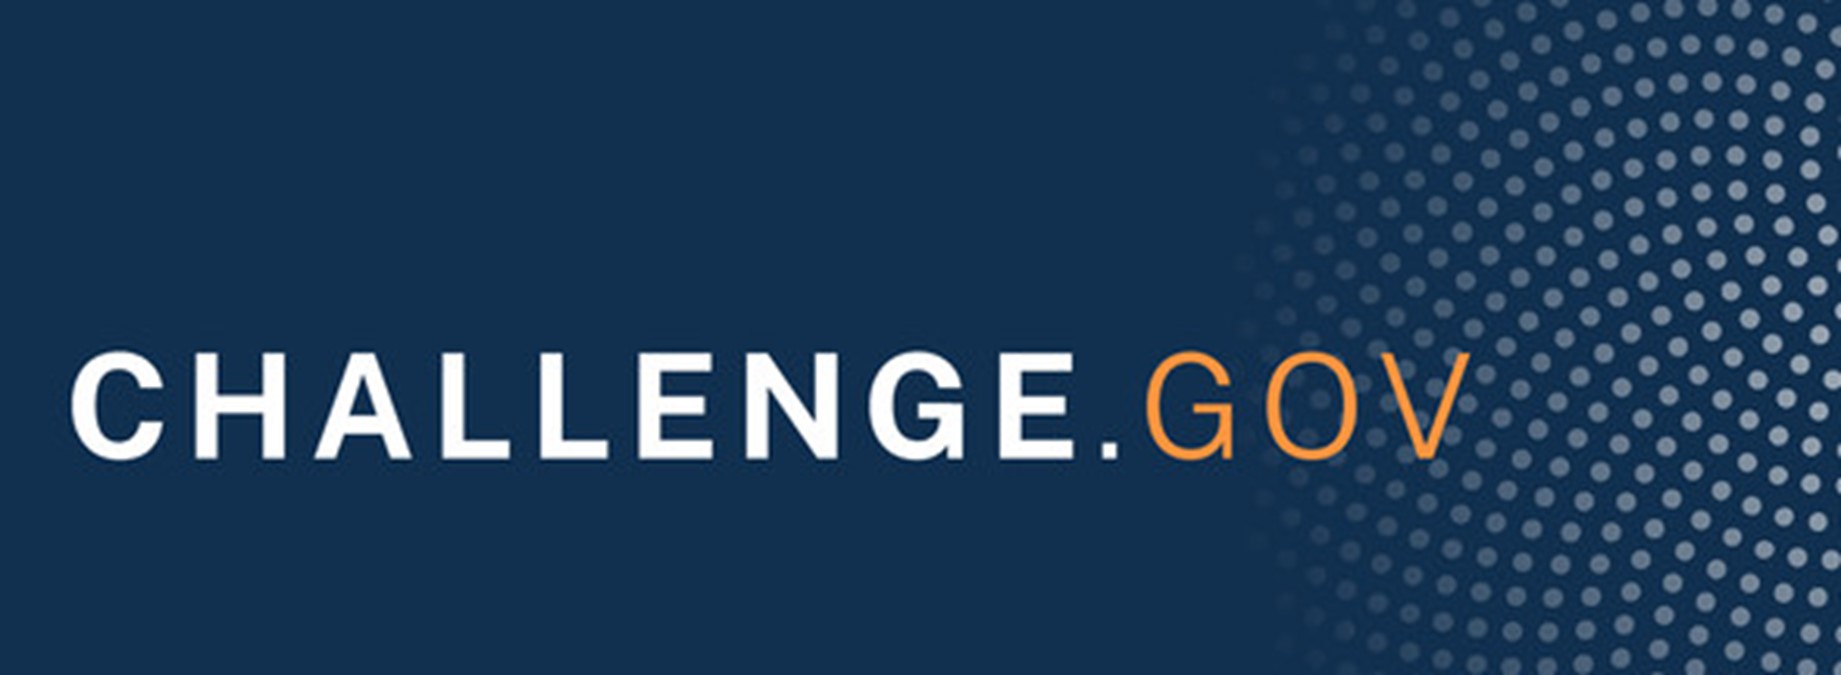 Challenge.Gov- where members of the public can participate to help the U.S. government solve problems big and small Photo